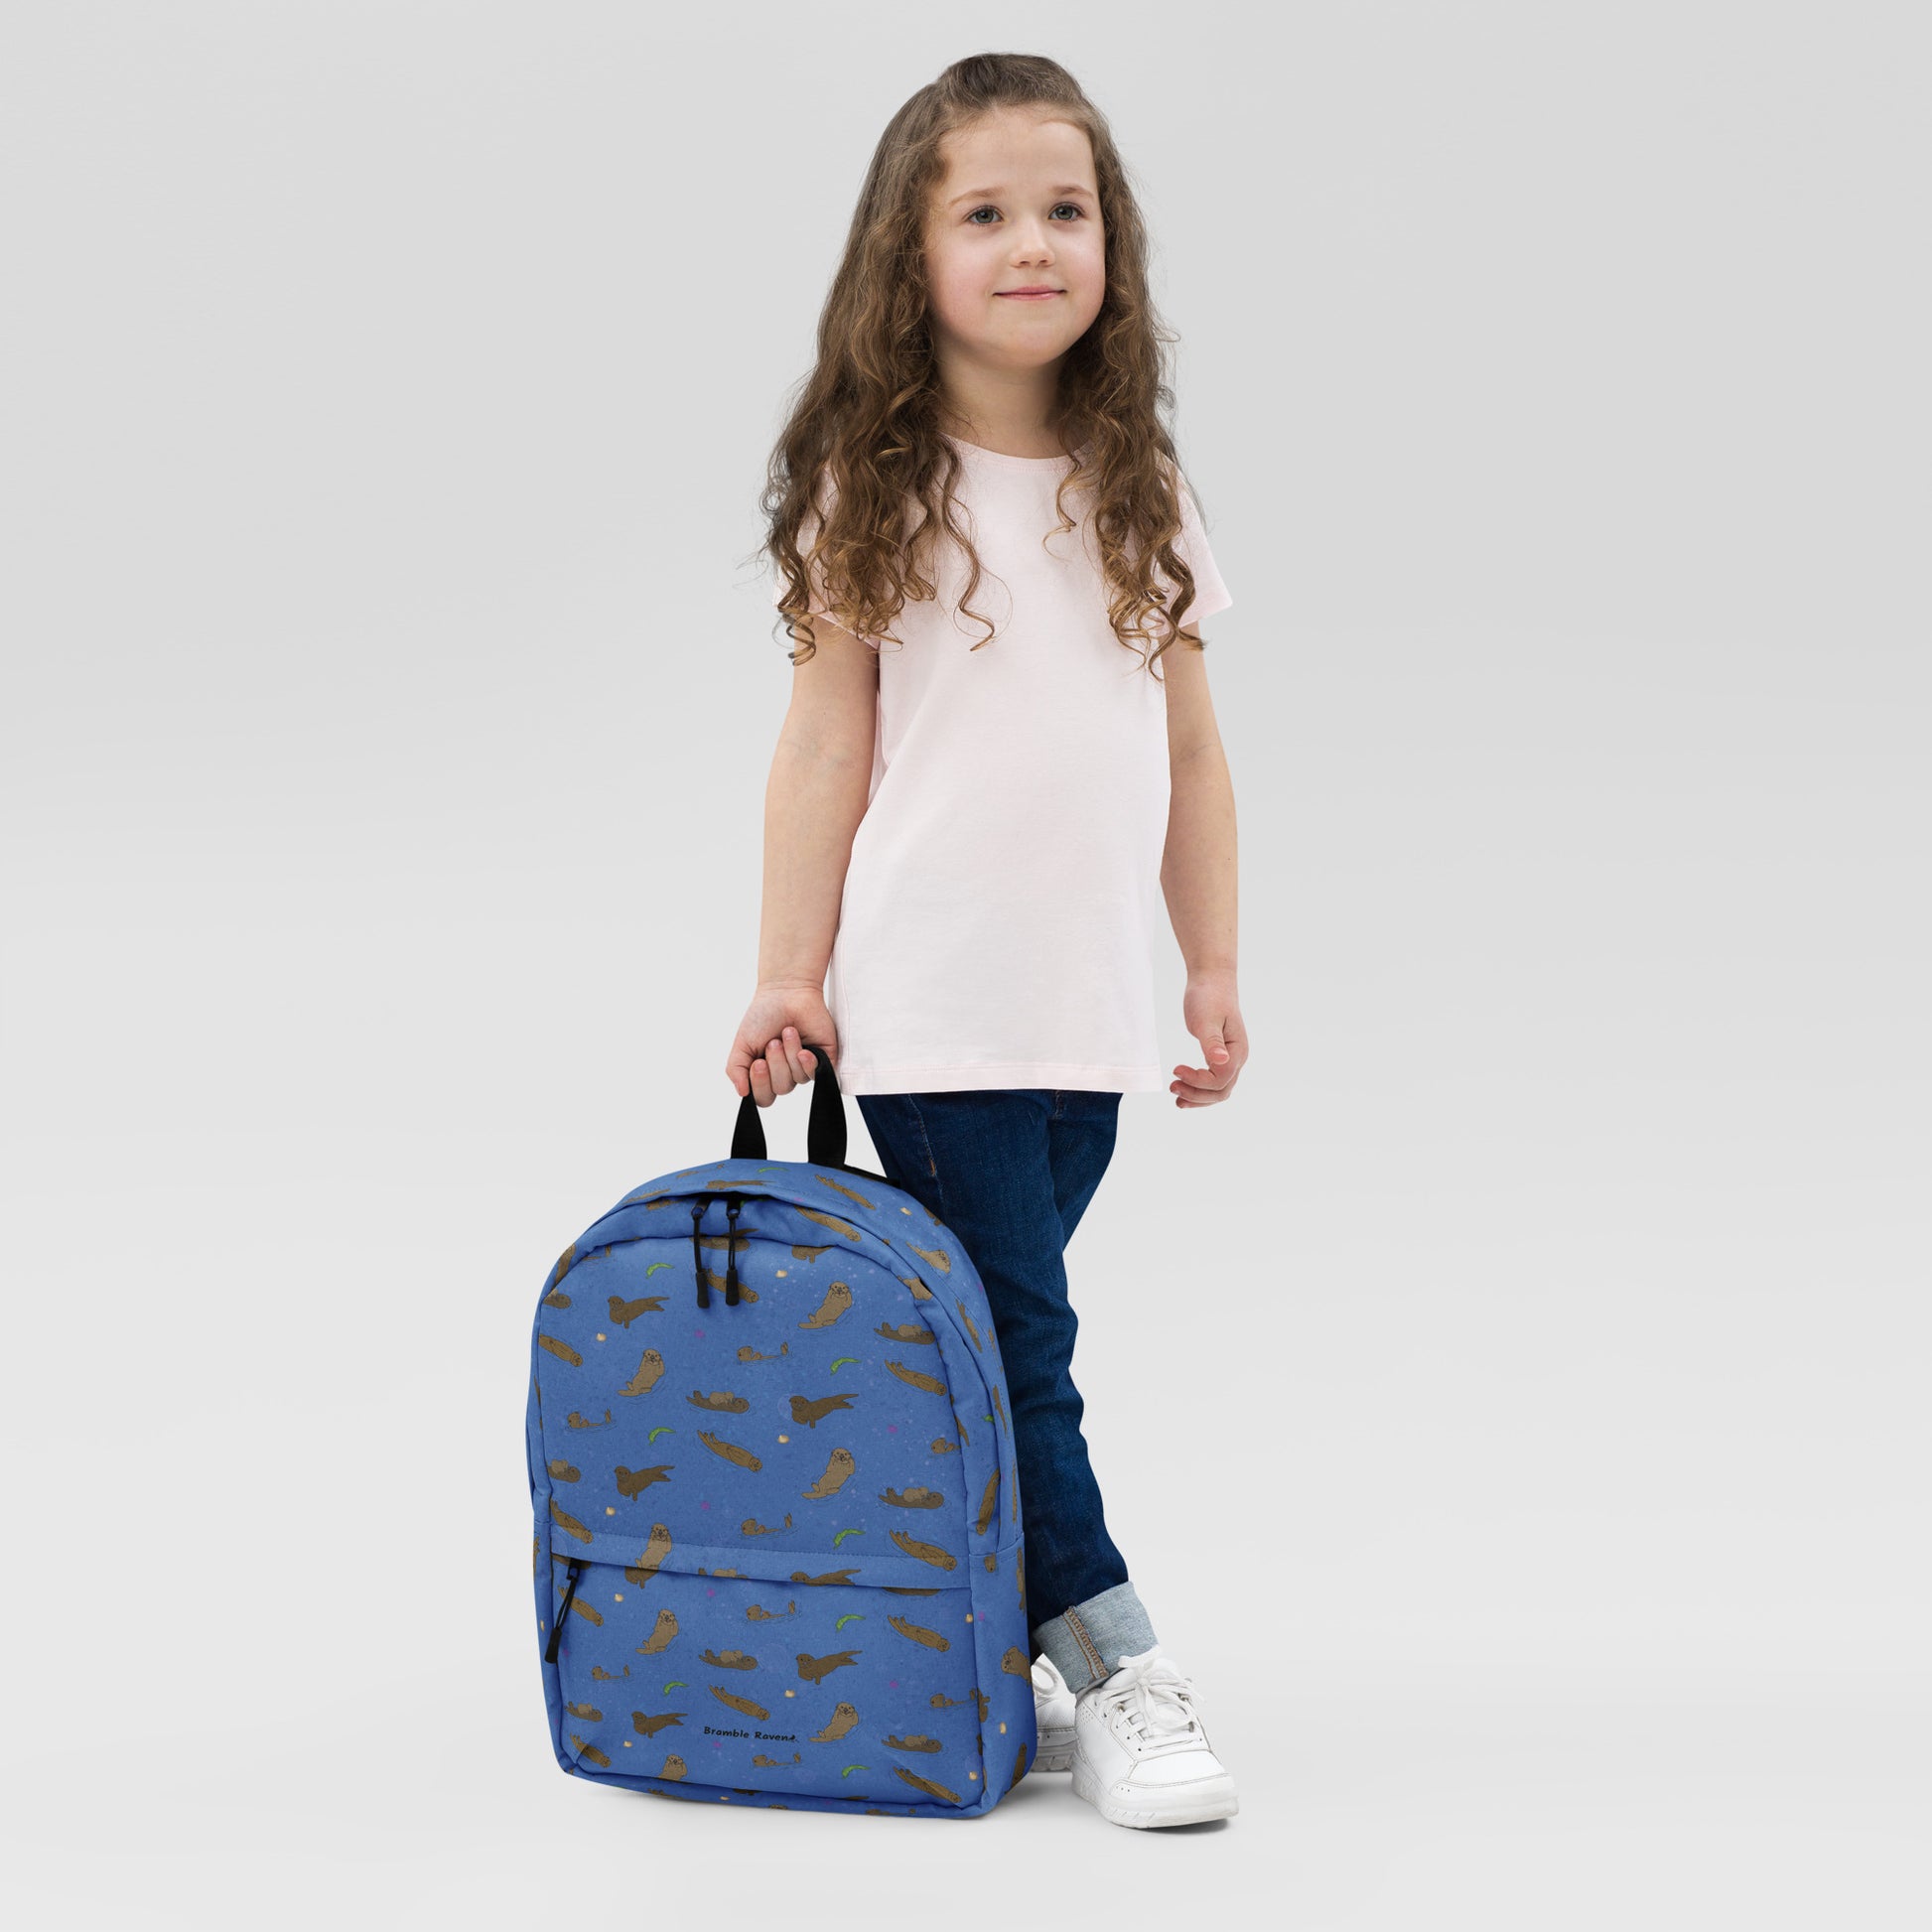 Medium-sized backpack featuring sea otters, seashells, seaweed and sea urchins on a blue background. Made with water resistant polyester, ergonomic straps, and comfort mesh back. Has a compartment that can hold a 15 inch laptop. Has a hidden zipper pocket on the back. Shown being held by a girl.